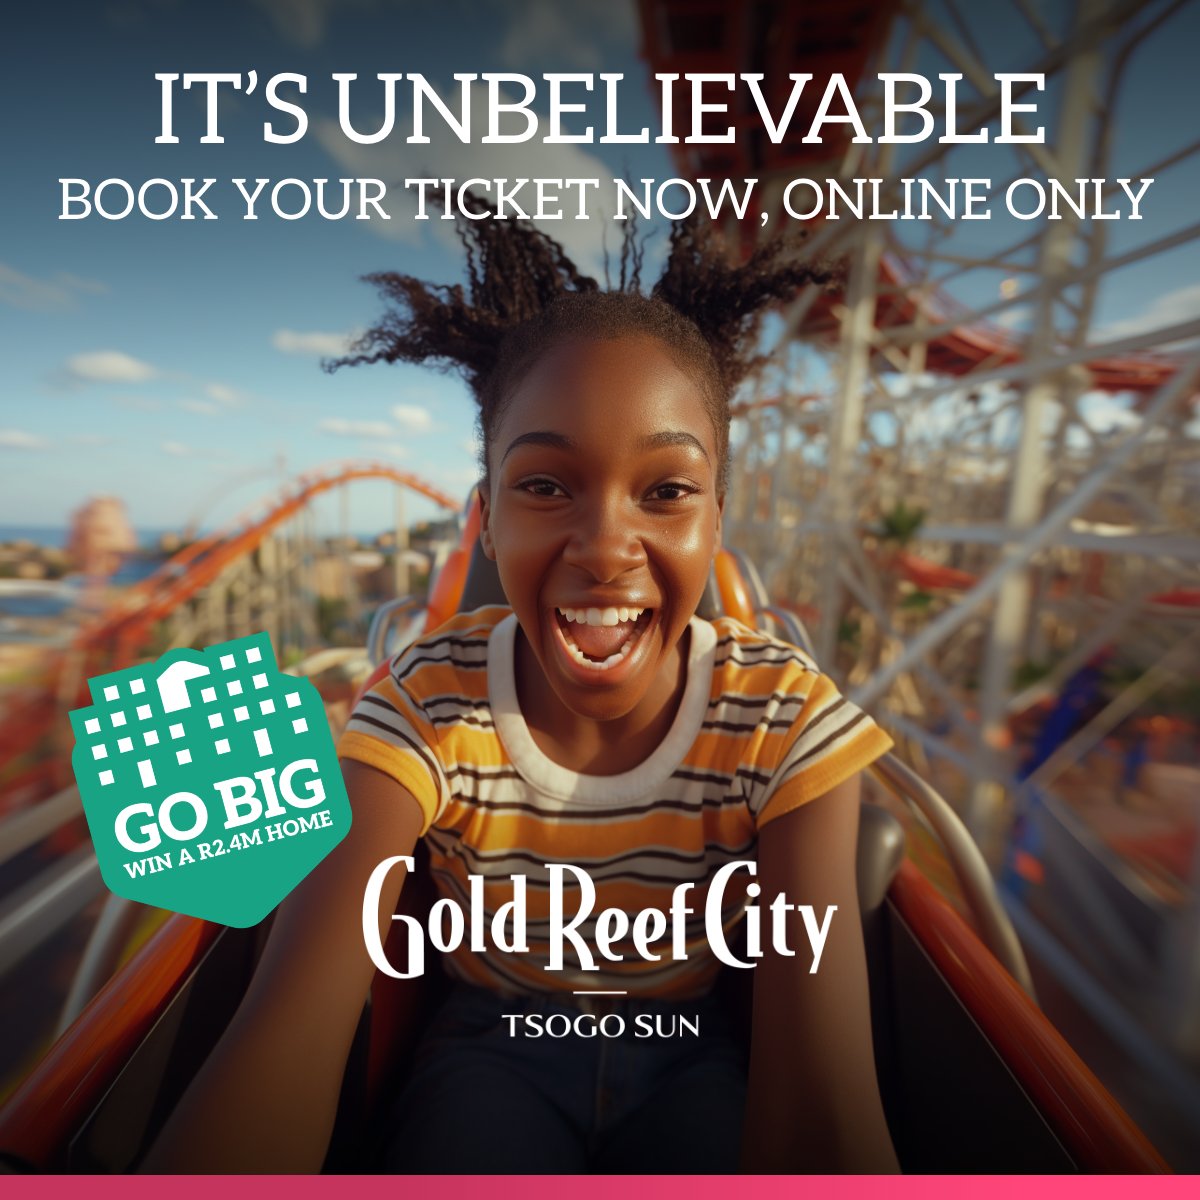 Have the ride of your life, experience dizzying heights and heart-pumping action for just R250pp. All-day access, all-day fun and all-day excitement at the Theme Park. Book now bit.ly/46RC2Nl